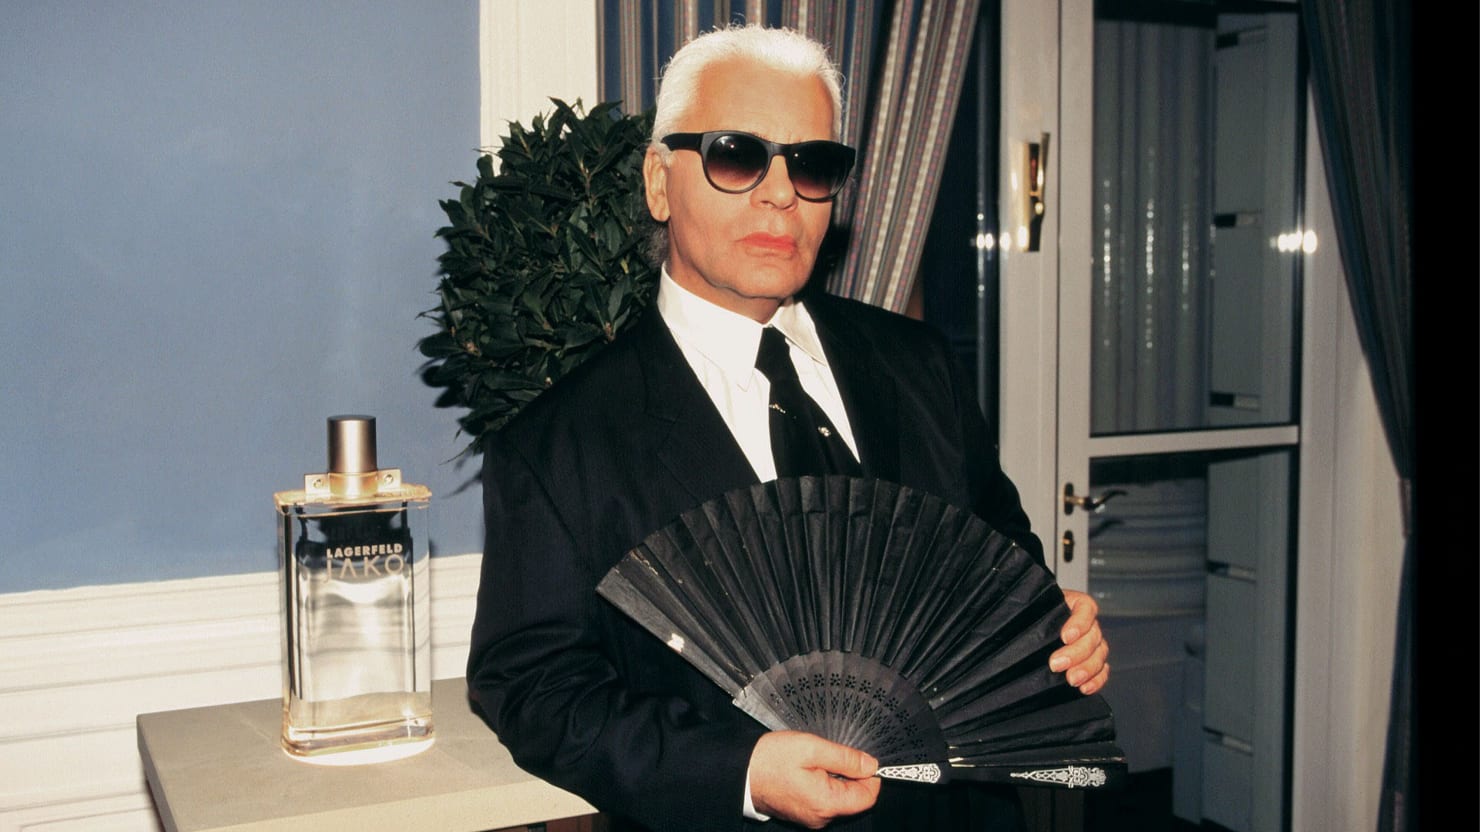 Remembering Karl Lagerfeld One Year On